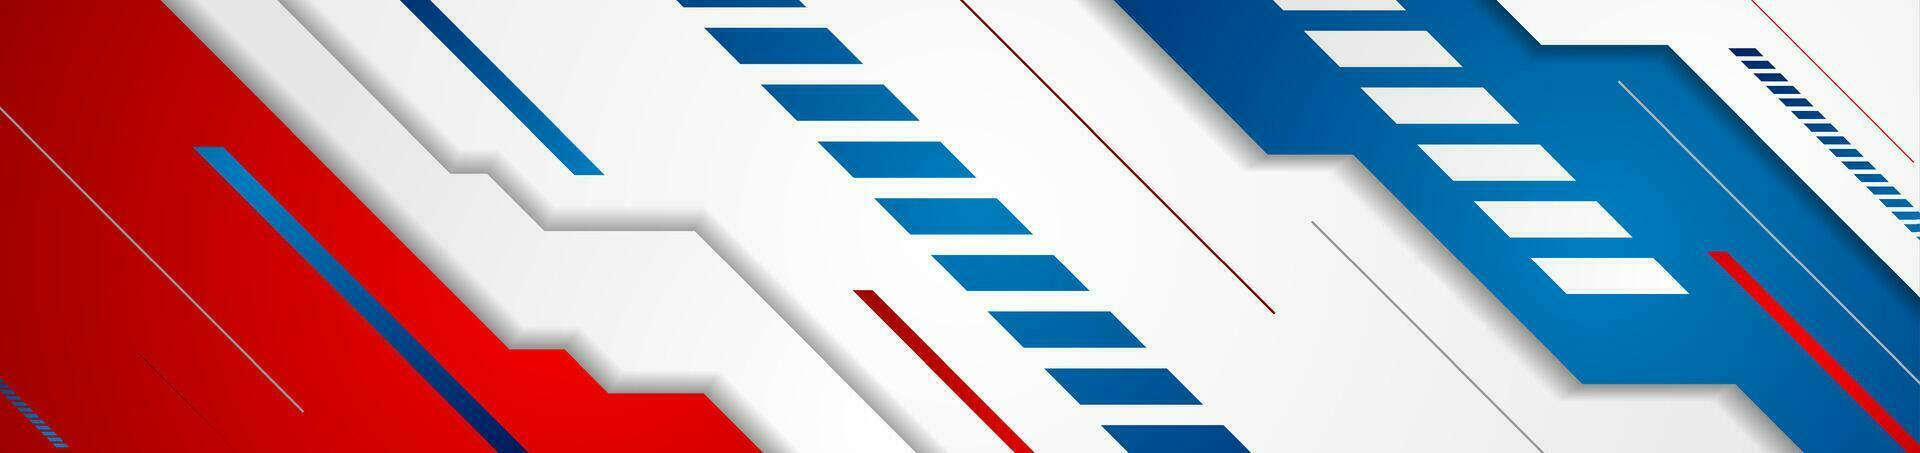 Red and blue abstract tech geometric banner design vector